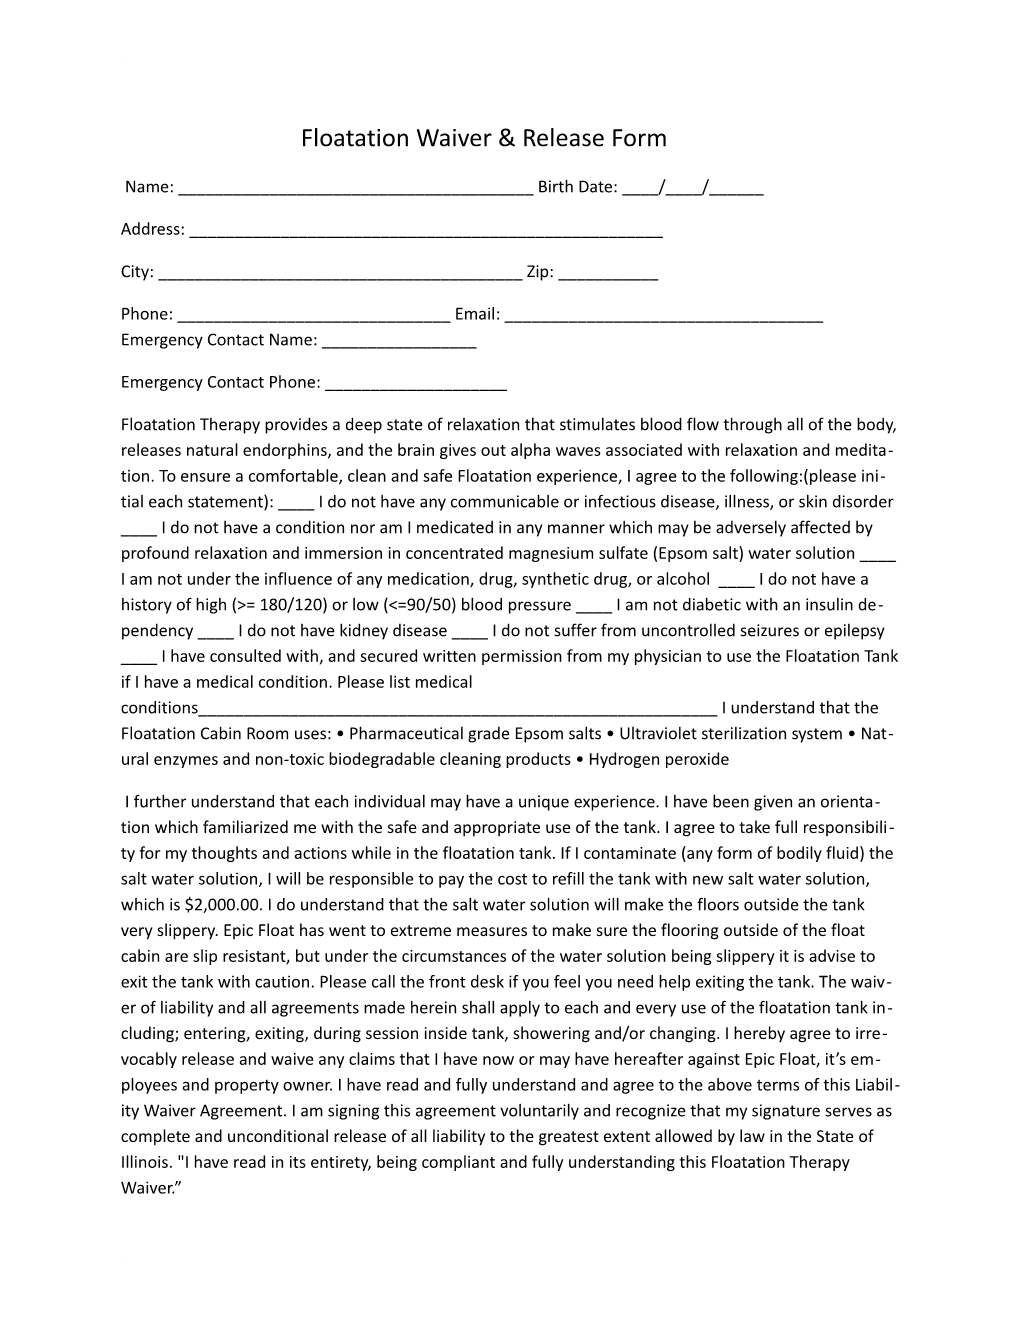 Floatation Waiver & Release Form